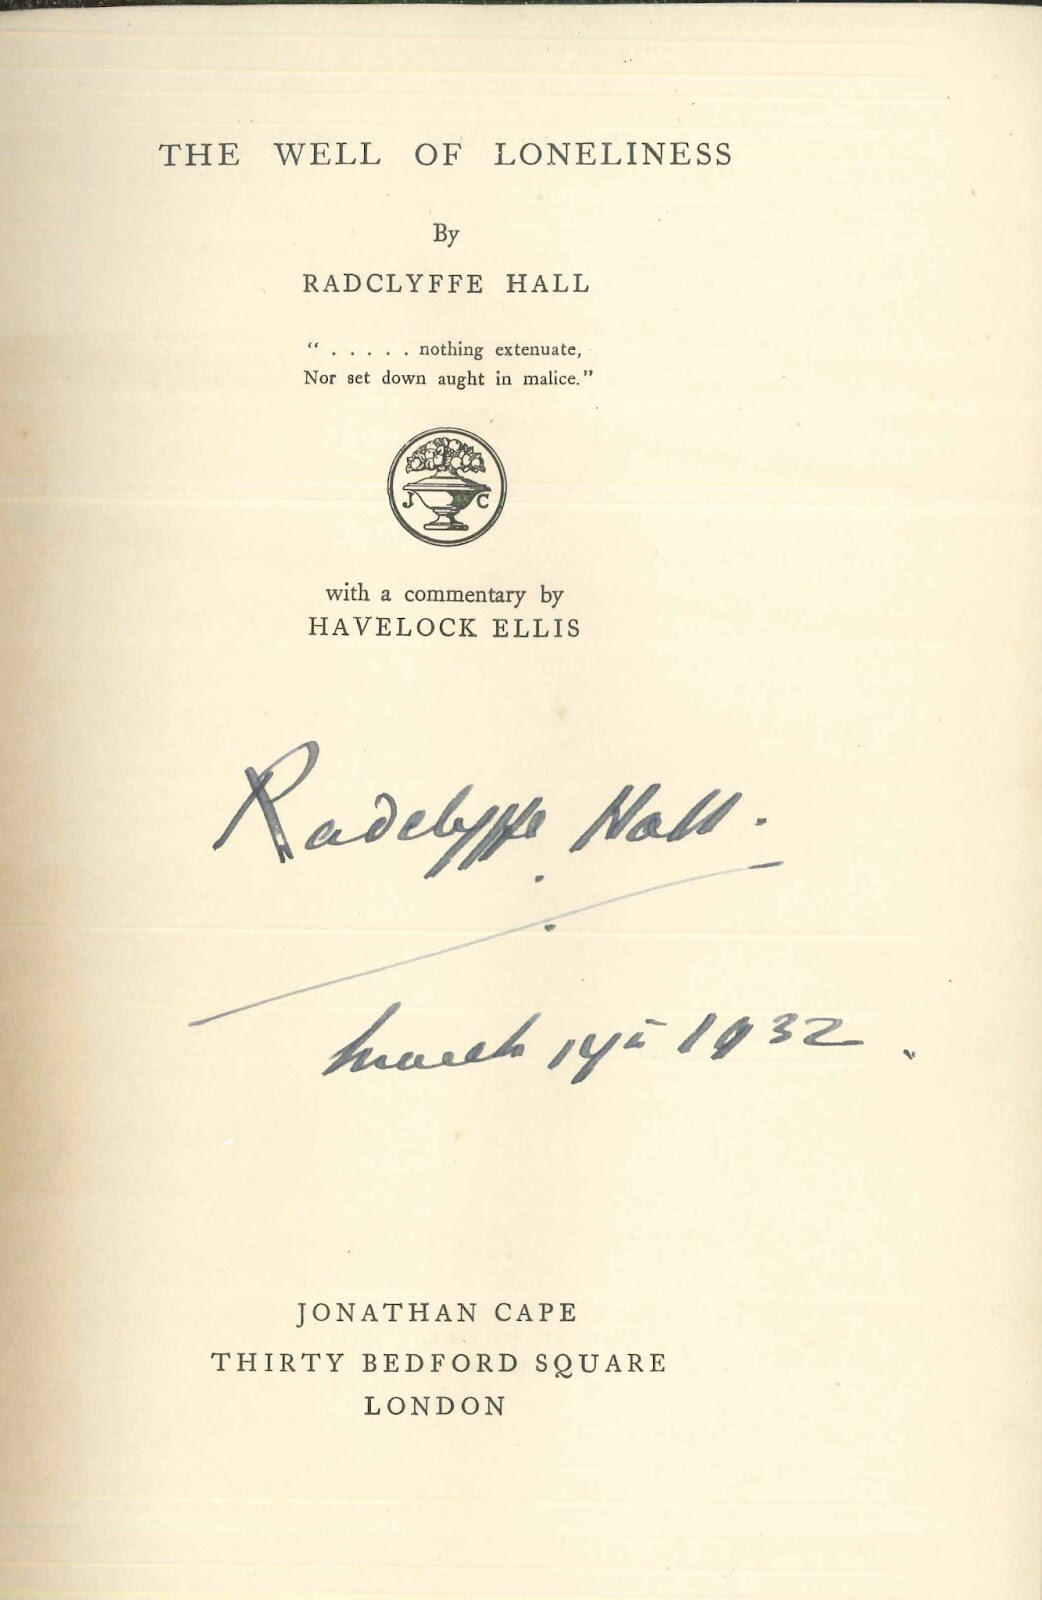 Cover page of The Well of Loneliness, signed by Radclyffe Hall